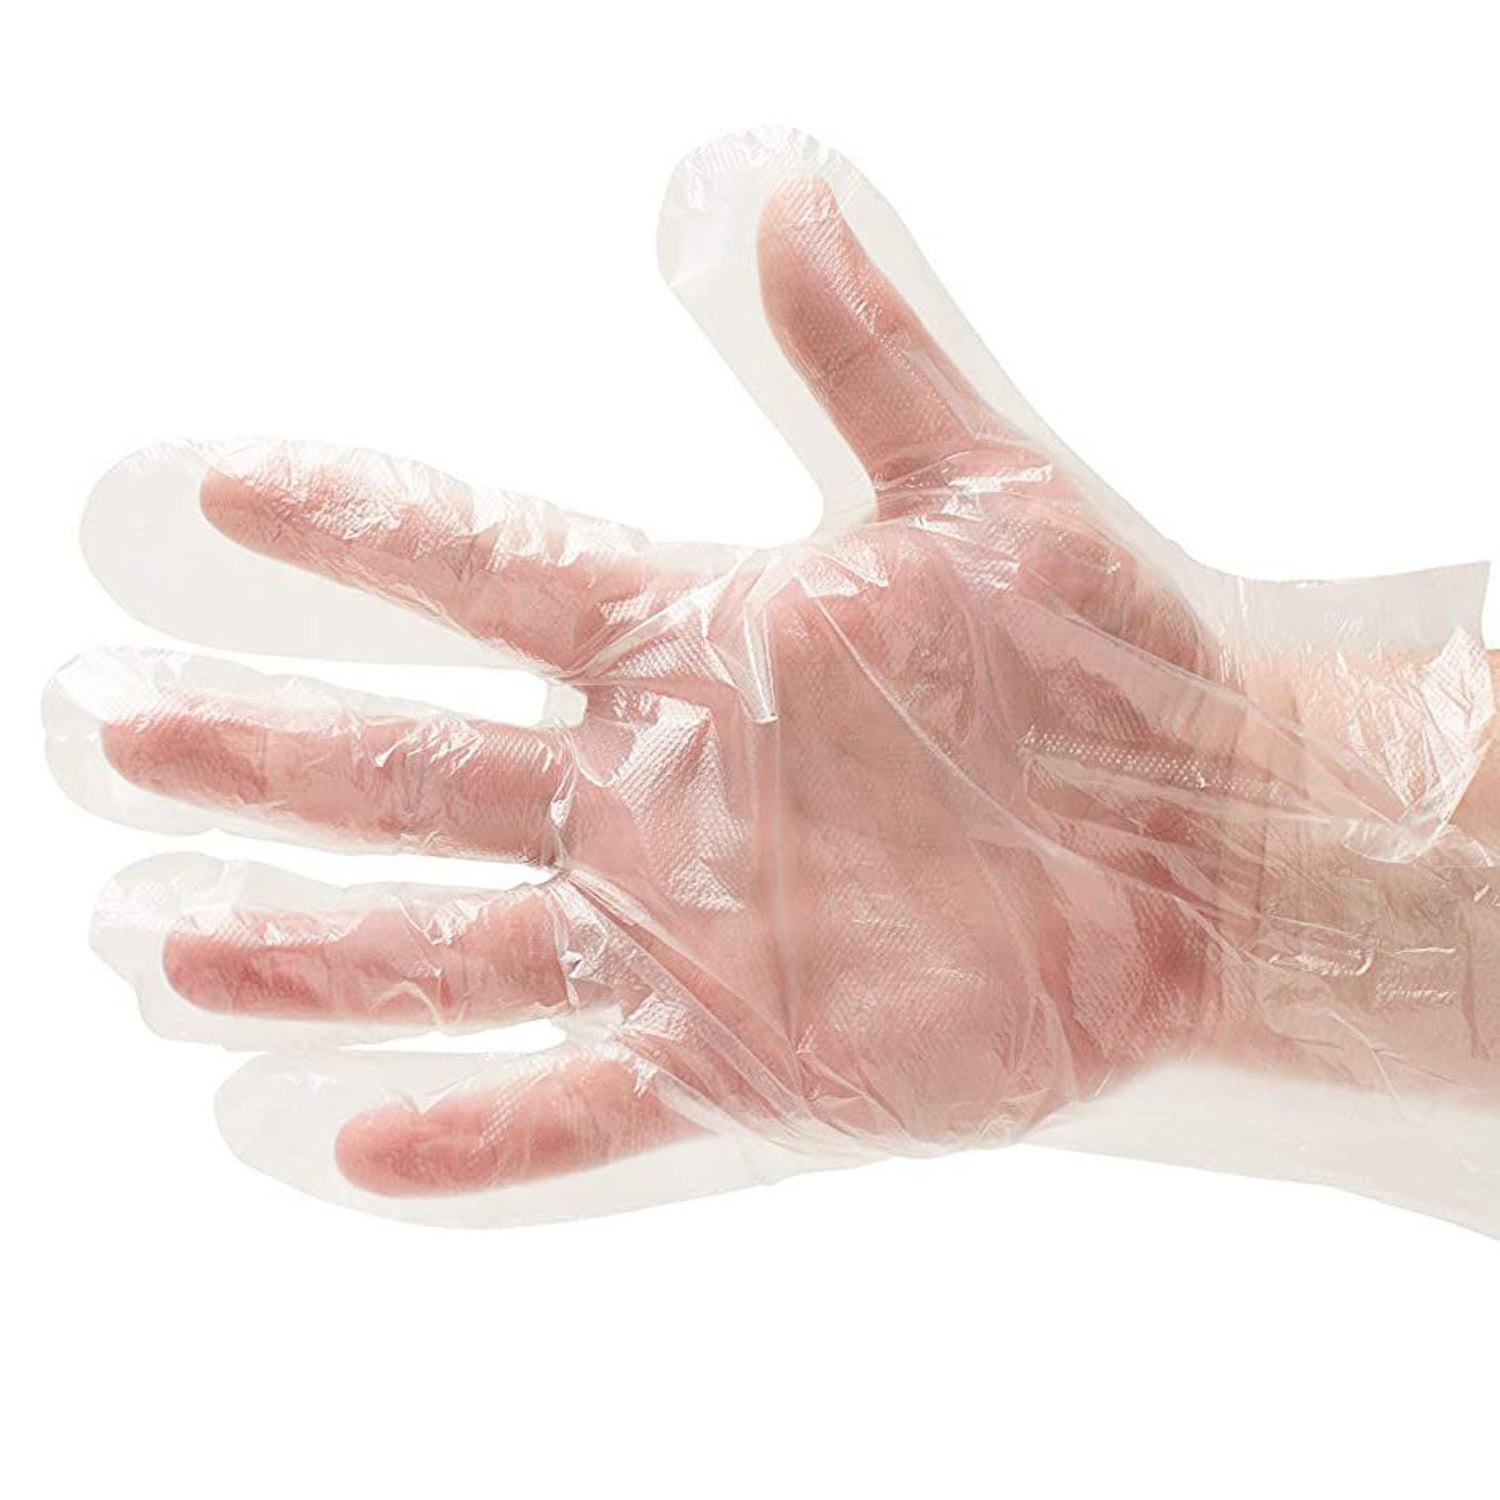 Polythene Disposable Gloves | Medium | Pack of 100 Pieces (1)